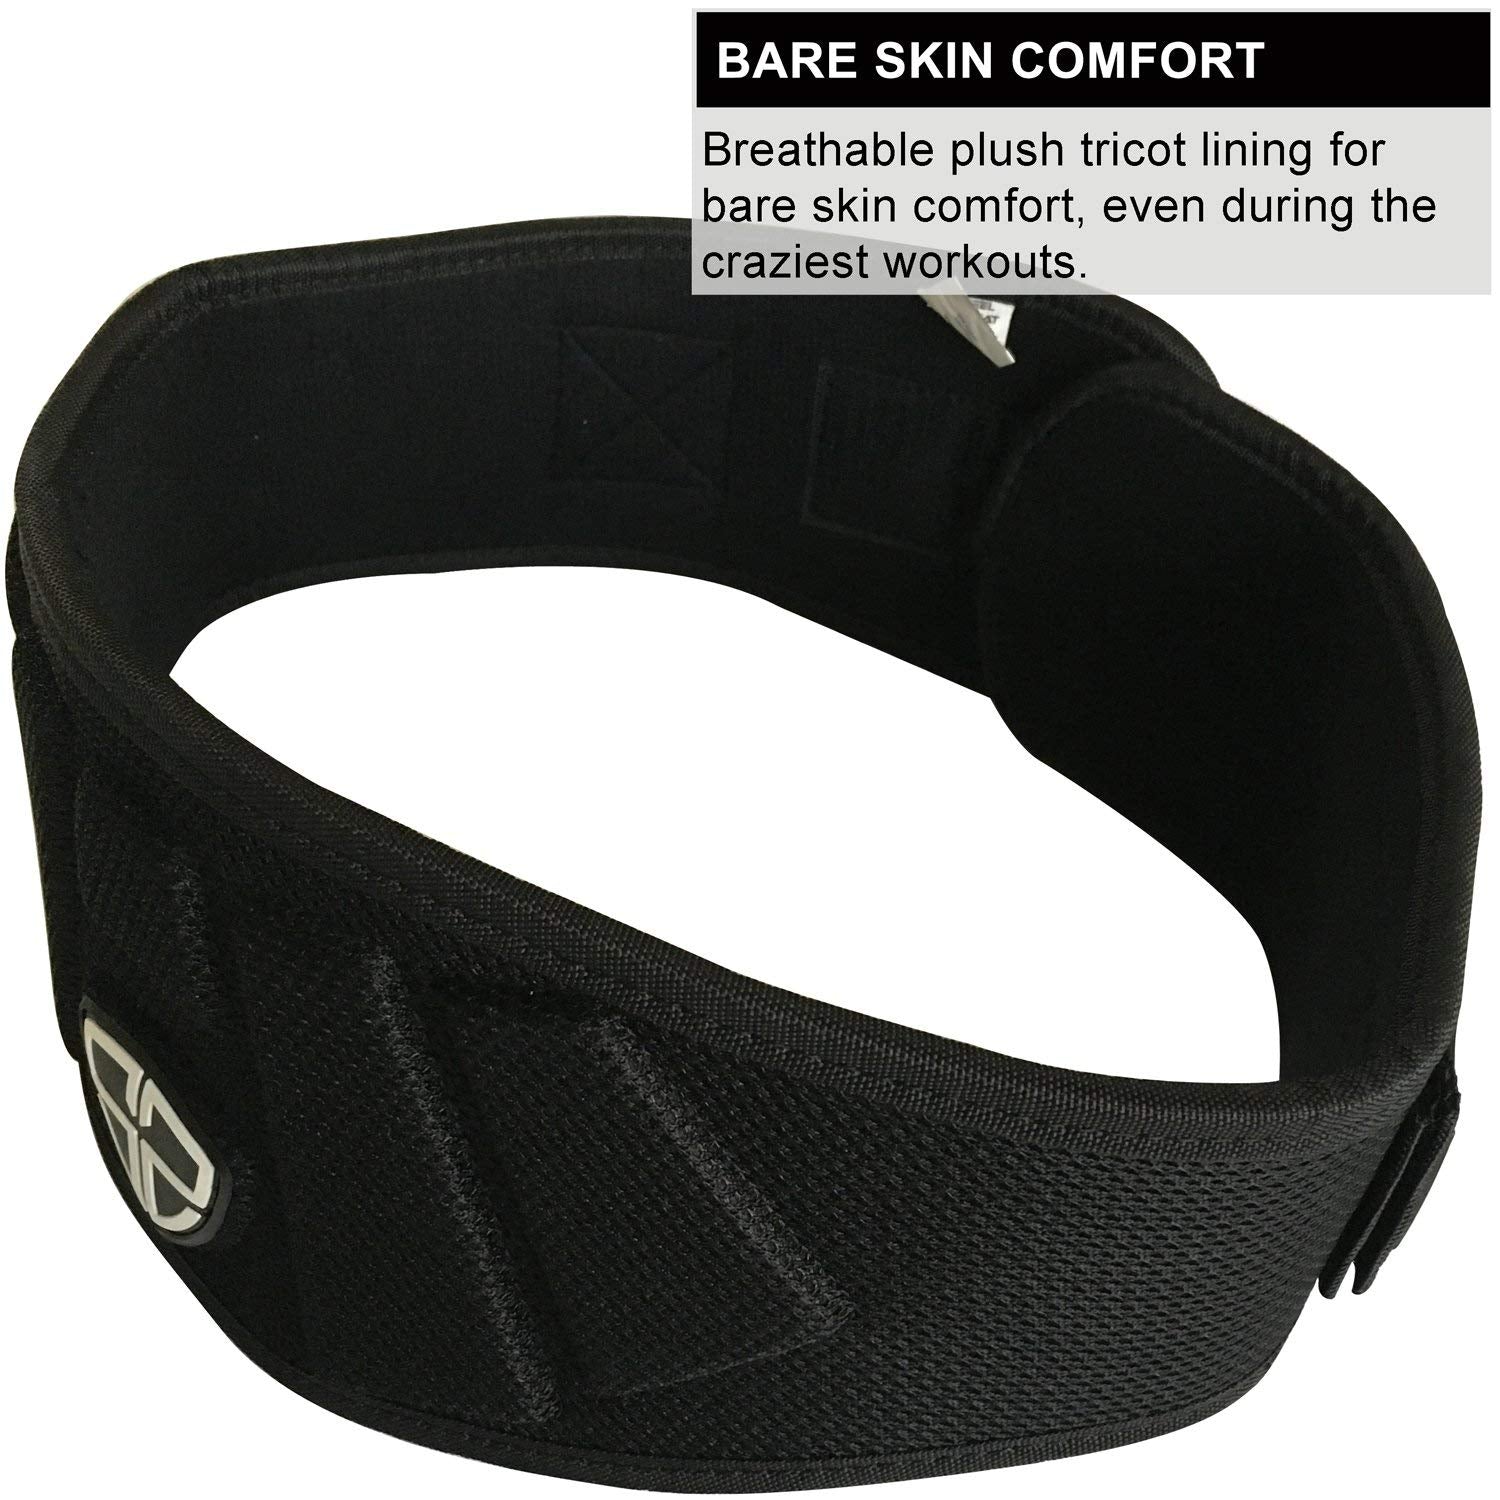 Steel Sweat Weight Lifting Belt - Nylon 6-inch Firm & Comfortable Back Support, Best for Workouts at The Gym, Weightlifting or Crossfit. Easily Adjustable MAXE Black XXL